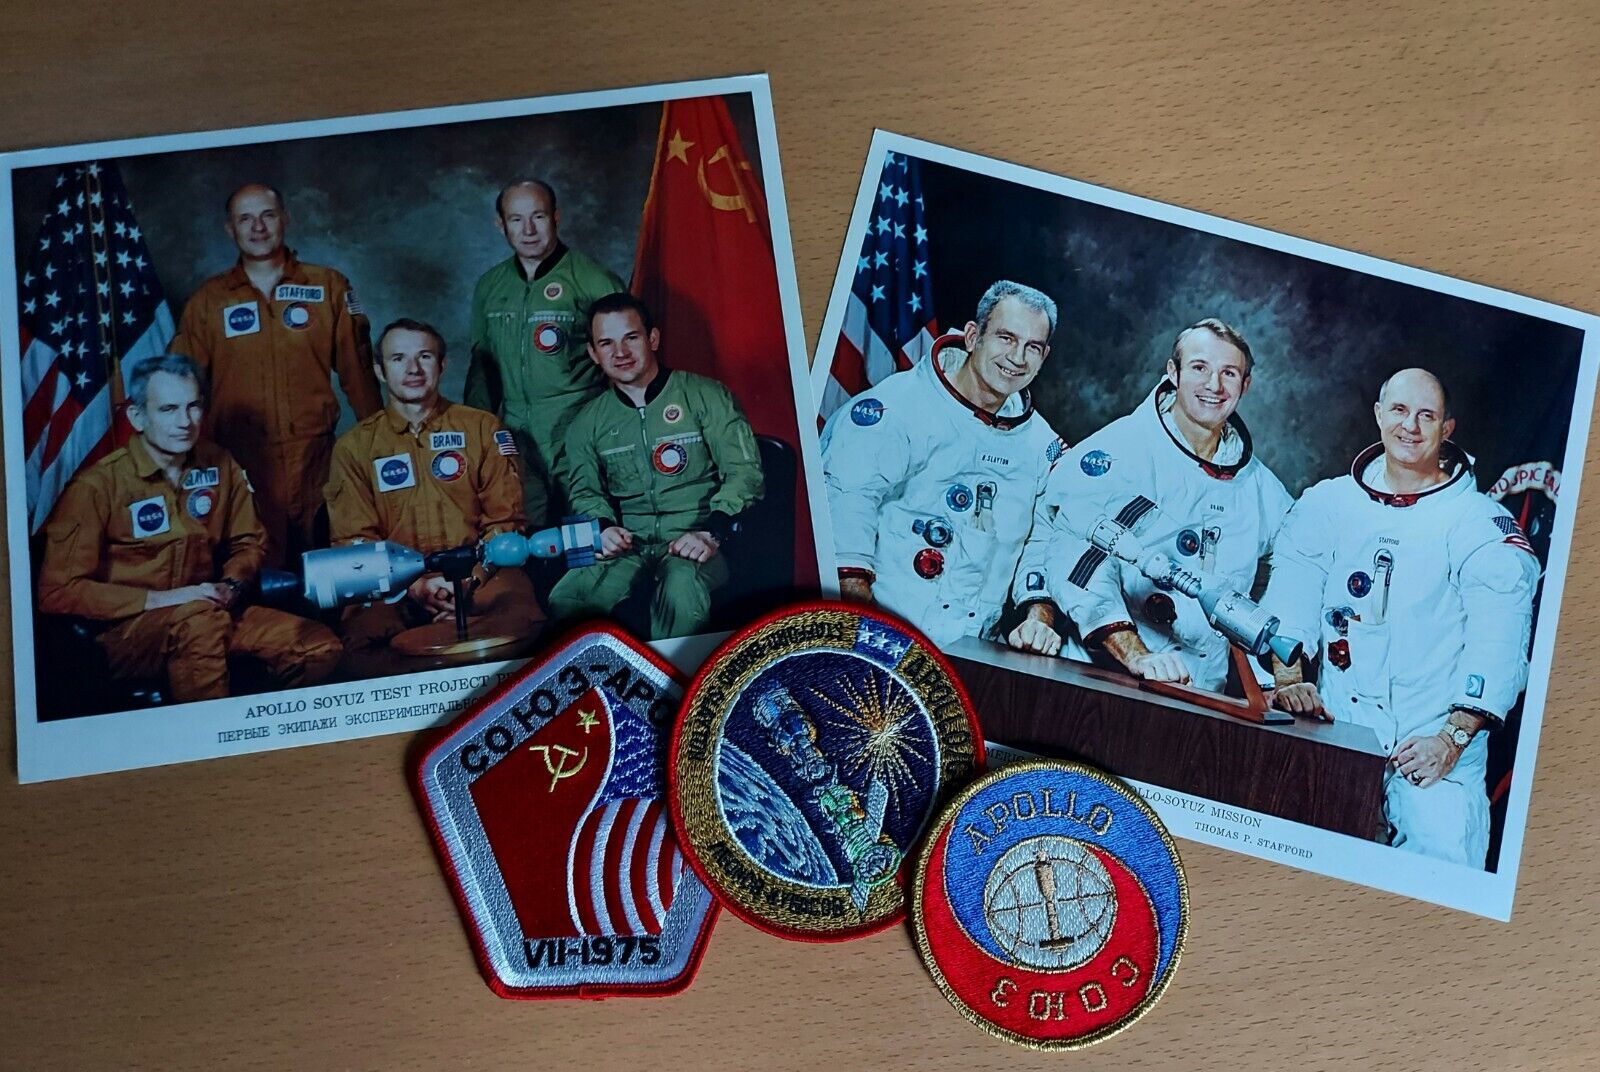 Apollo-Soyuz Test Programme 1975. Mission Patches, Portraits and Postal Covers